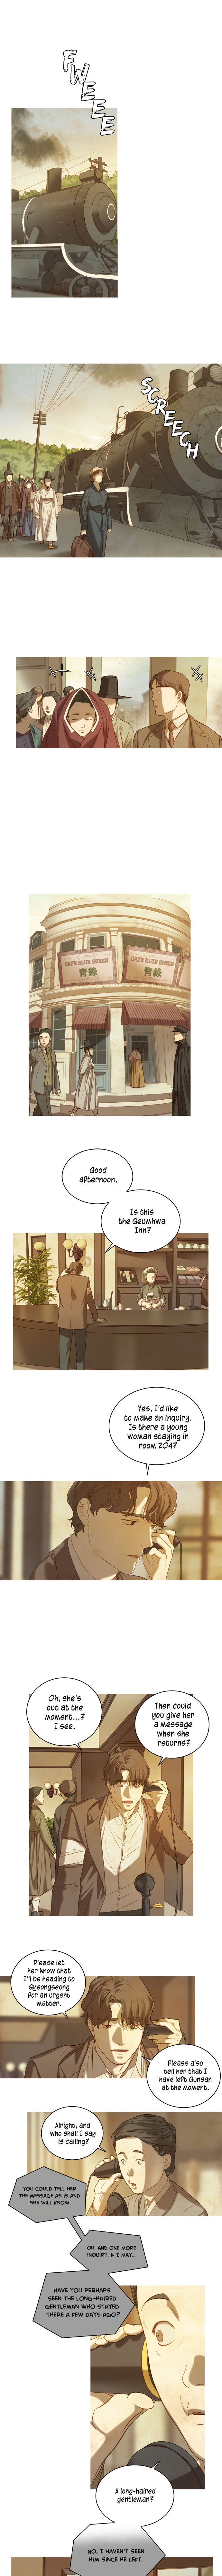 The Whale Star - The Gyeongseong Mermaid - Chapter 6 Page 1